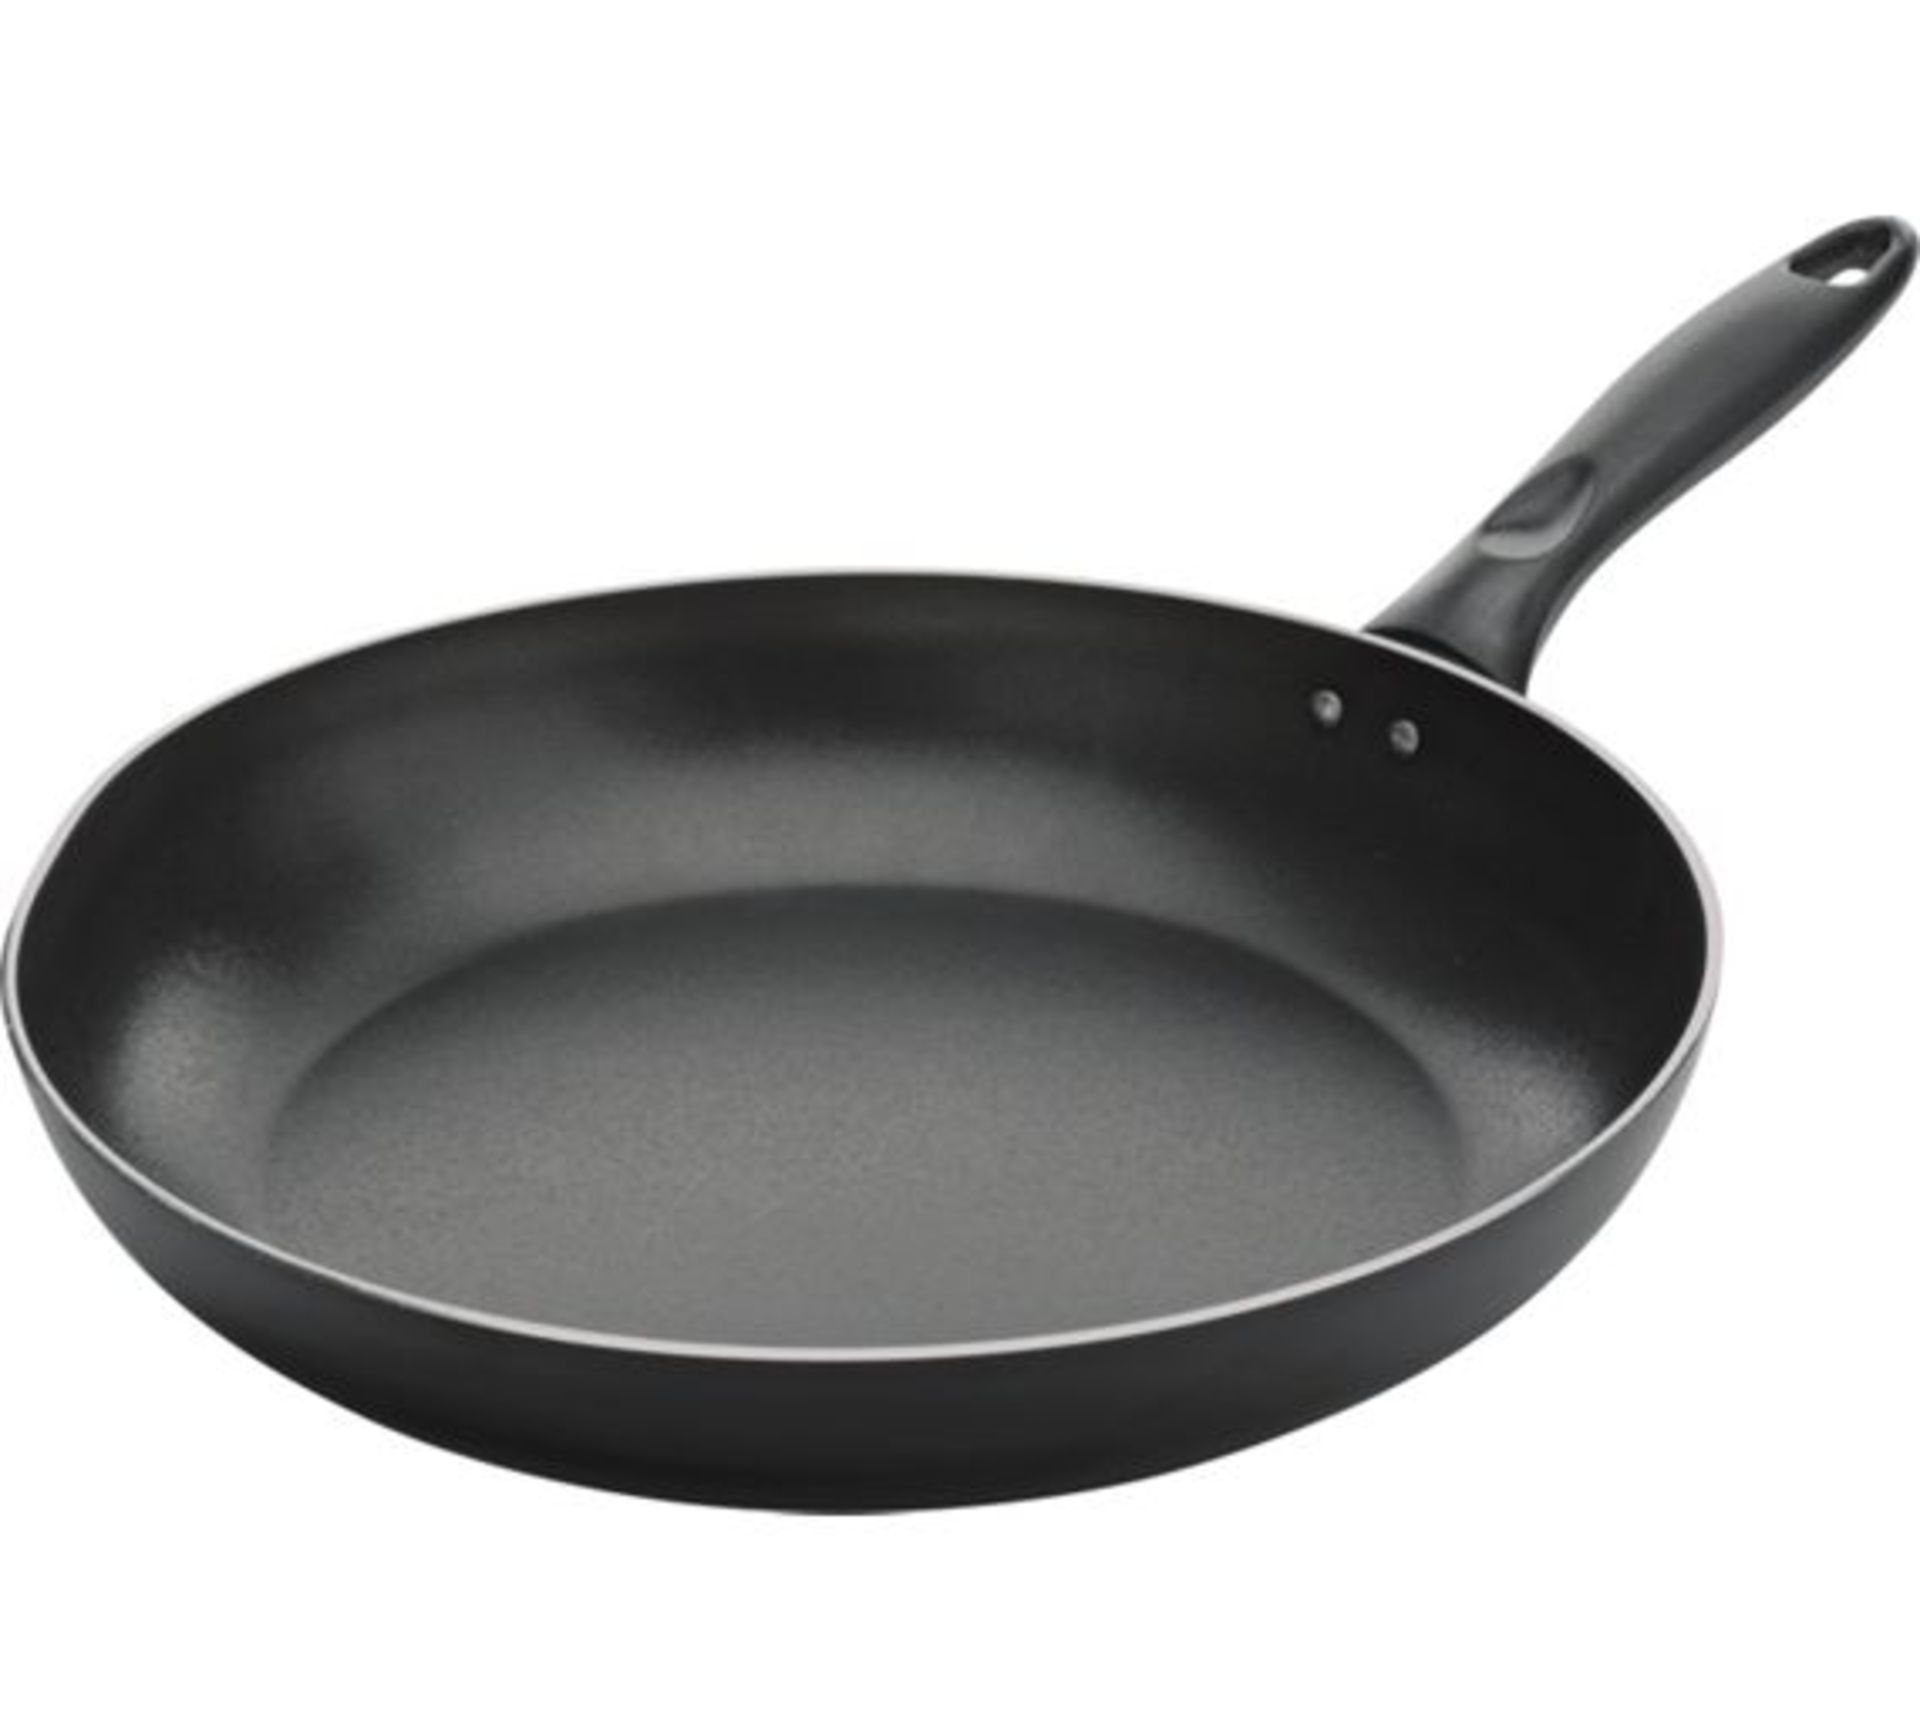 V *TRADE QTY* Brand New 20cm Aluminium Non-Stick Teflon Coated Saute Pan With Stainless Steel and